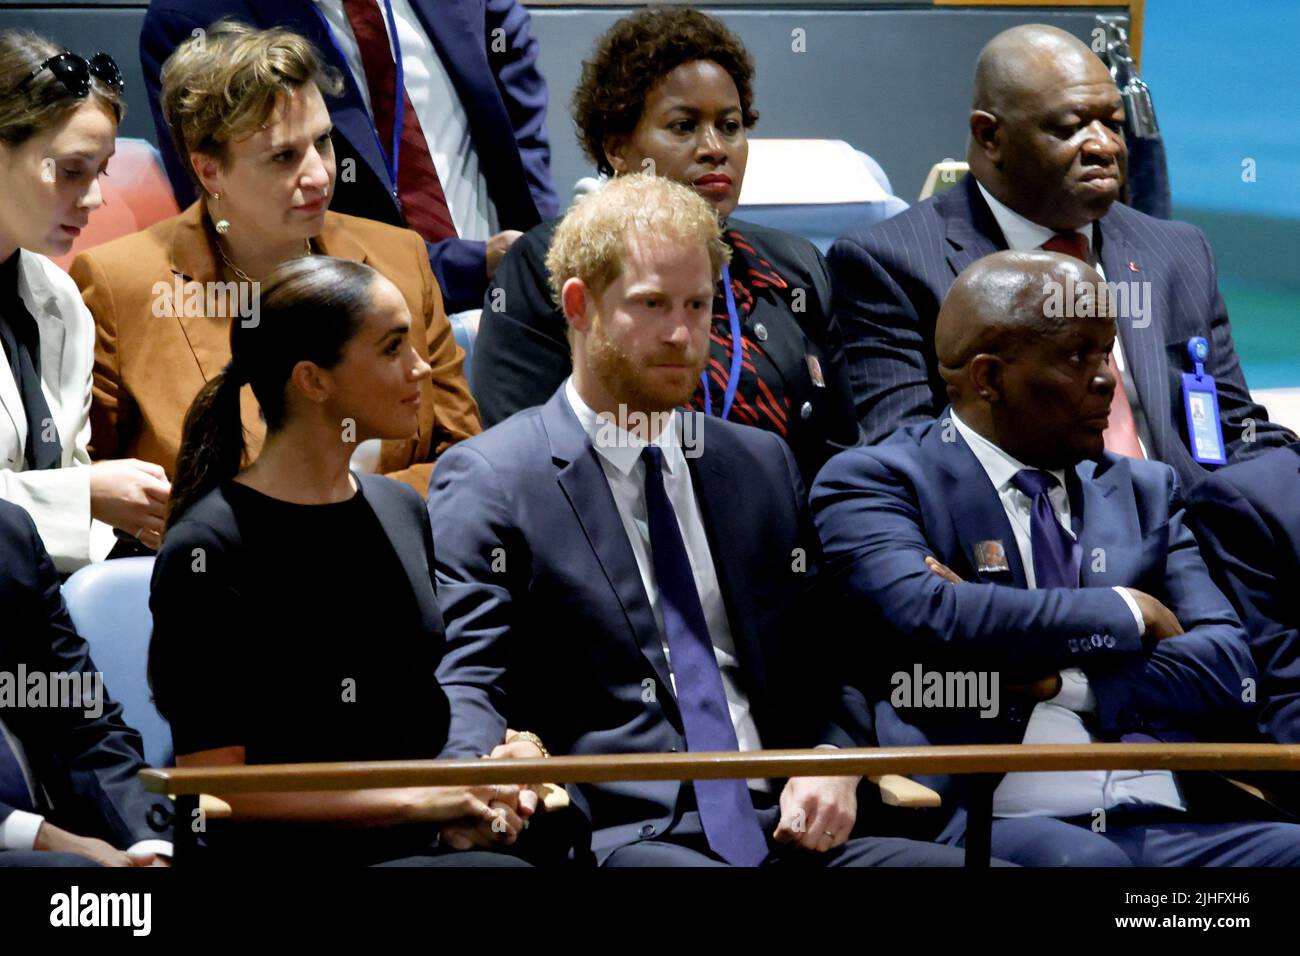 Britain's Prince Harry and his wife Meghan, Duchess of Sussex, attend the United Nations General Assembly celebration of Nelson Mandela International Day at United Nations Headquarters in New York, U.S., July 18, 2022. REUTERS/Eduardo Munoz Stock Photo